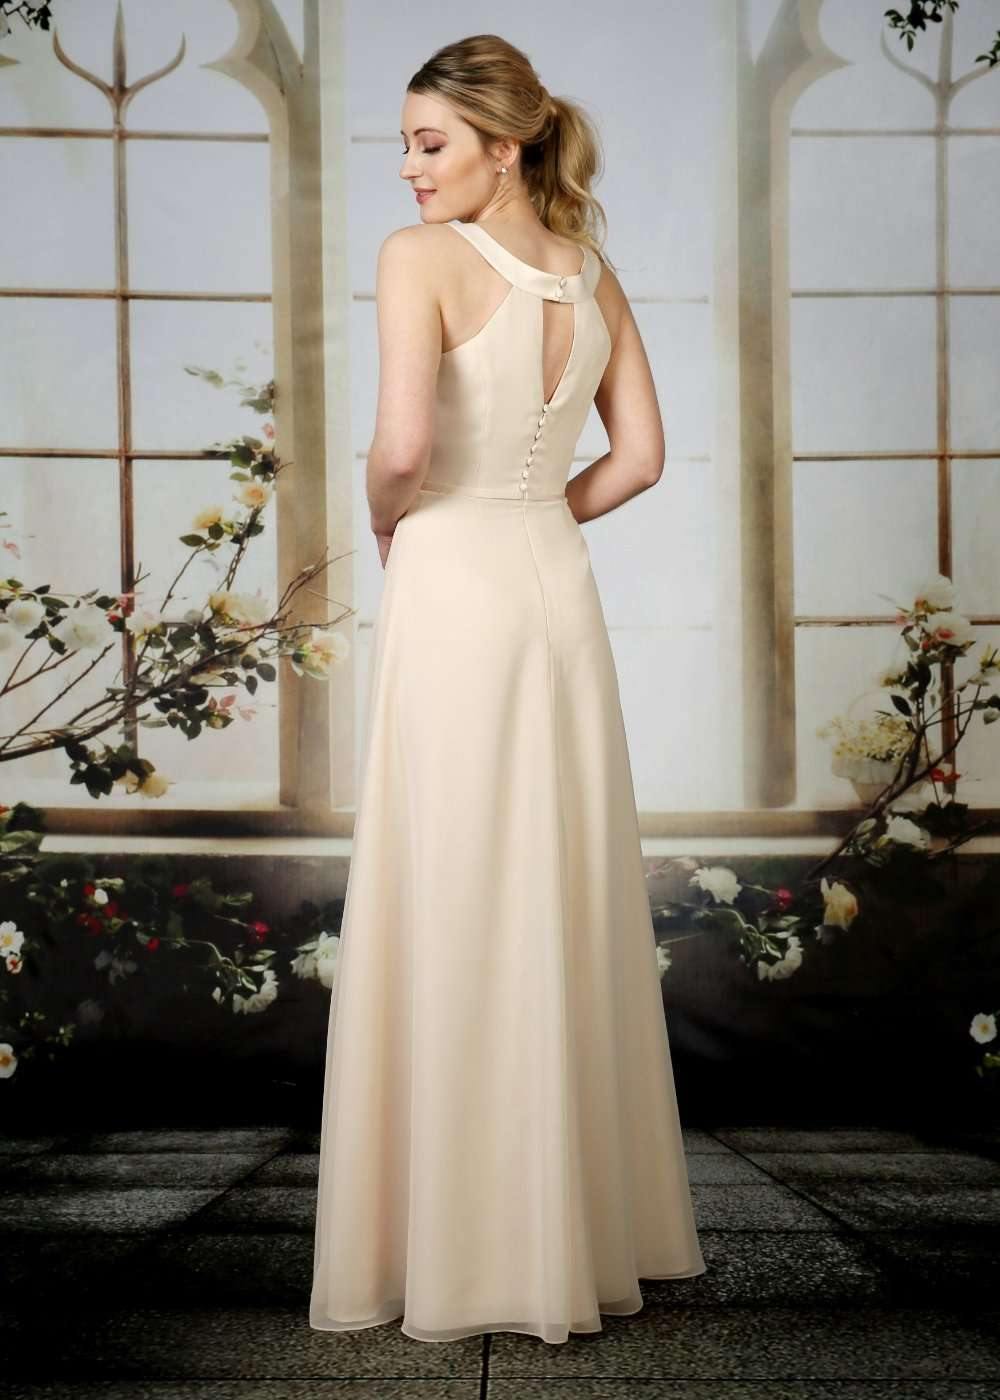 Anna Nieve Occasion - Adore Bridal and Occasion Wear